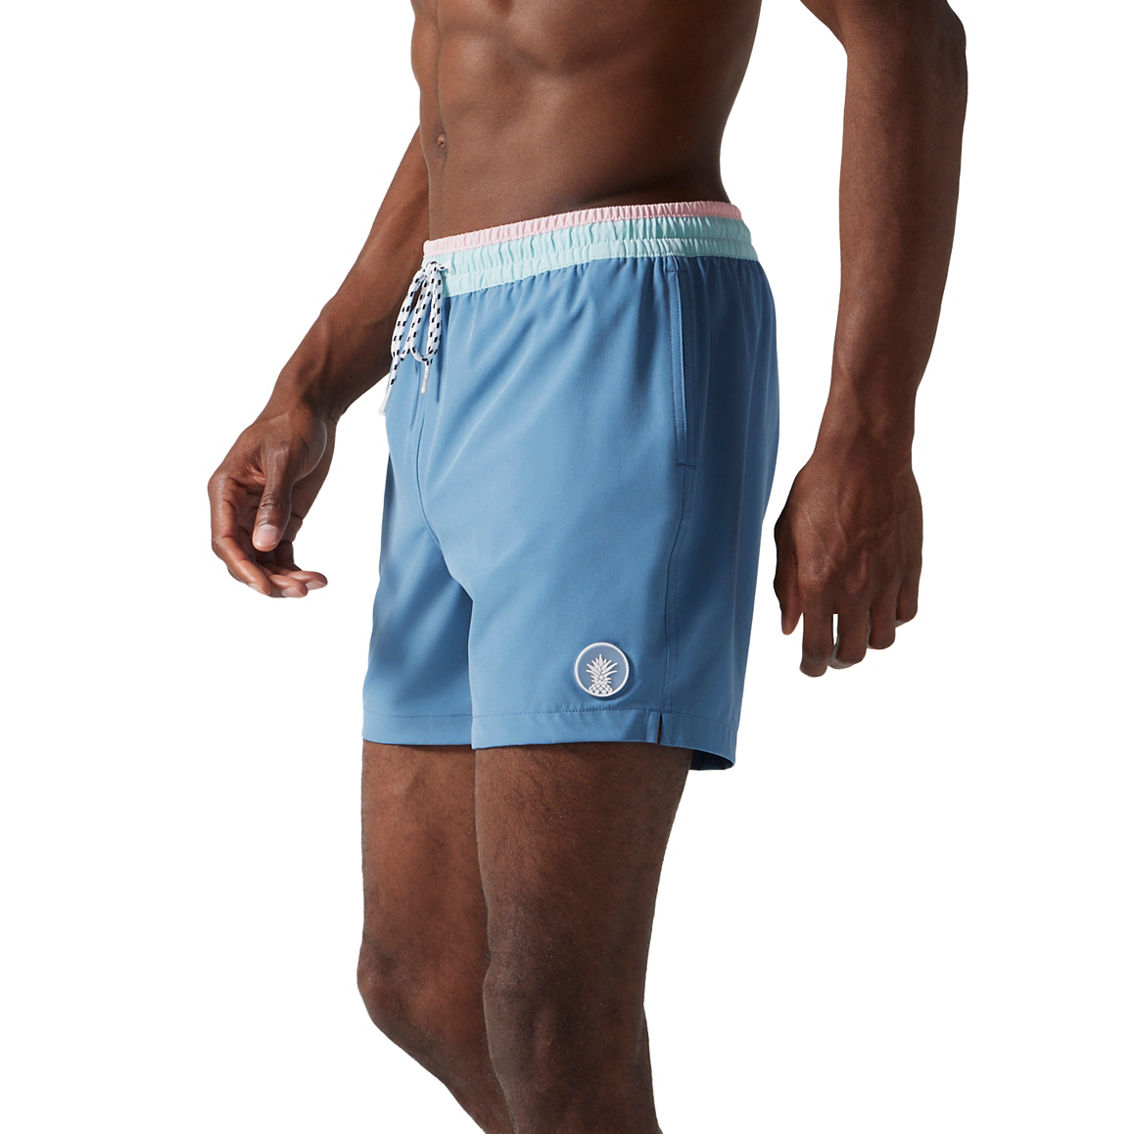 Chubbies The Gravel Roads 5.5 in. Classic Lined Trunks - Image 3 of 8